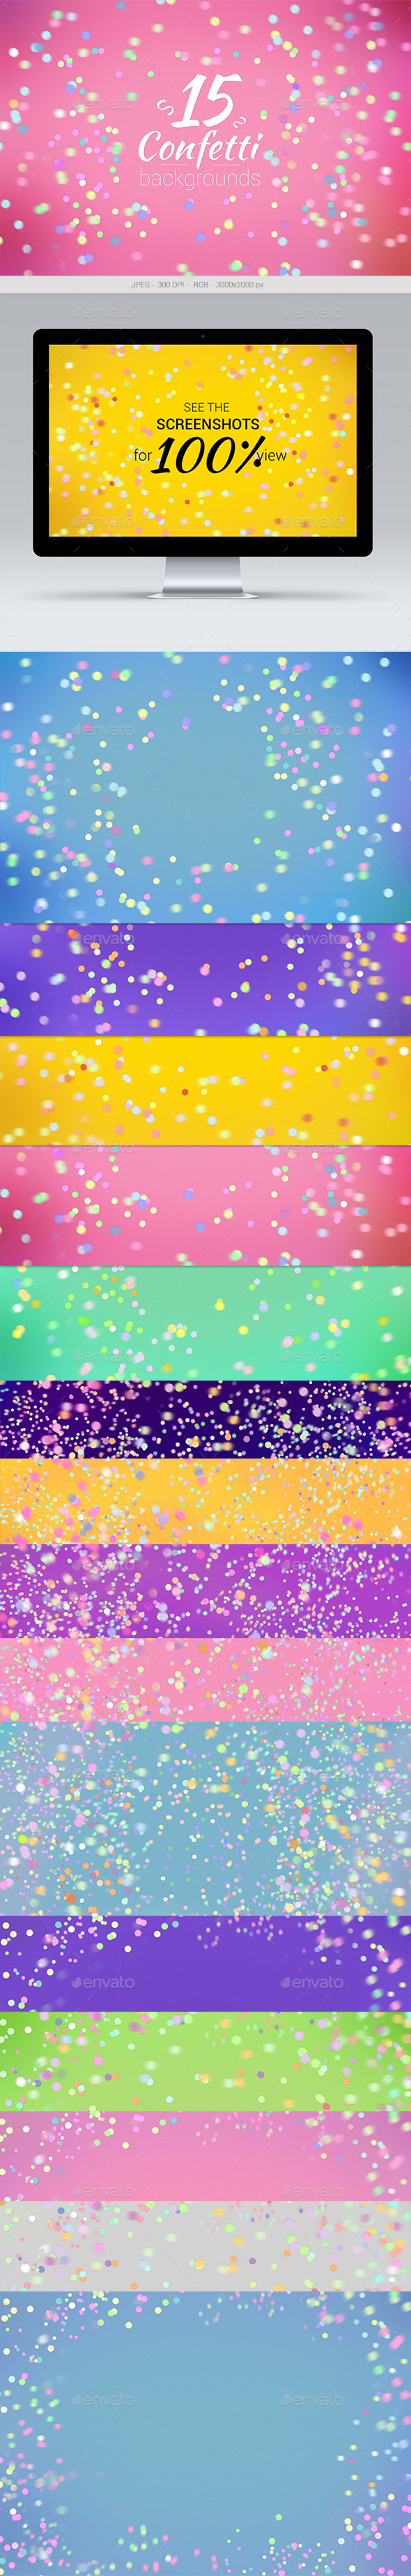 15 Confetti Backgrounds by MApictures | GraphicRiver